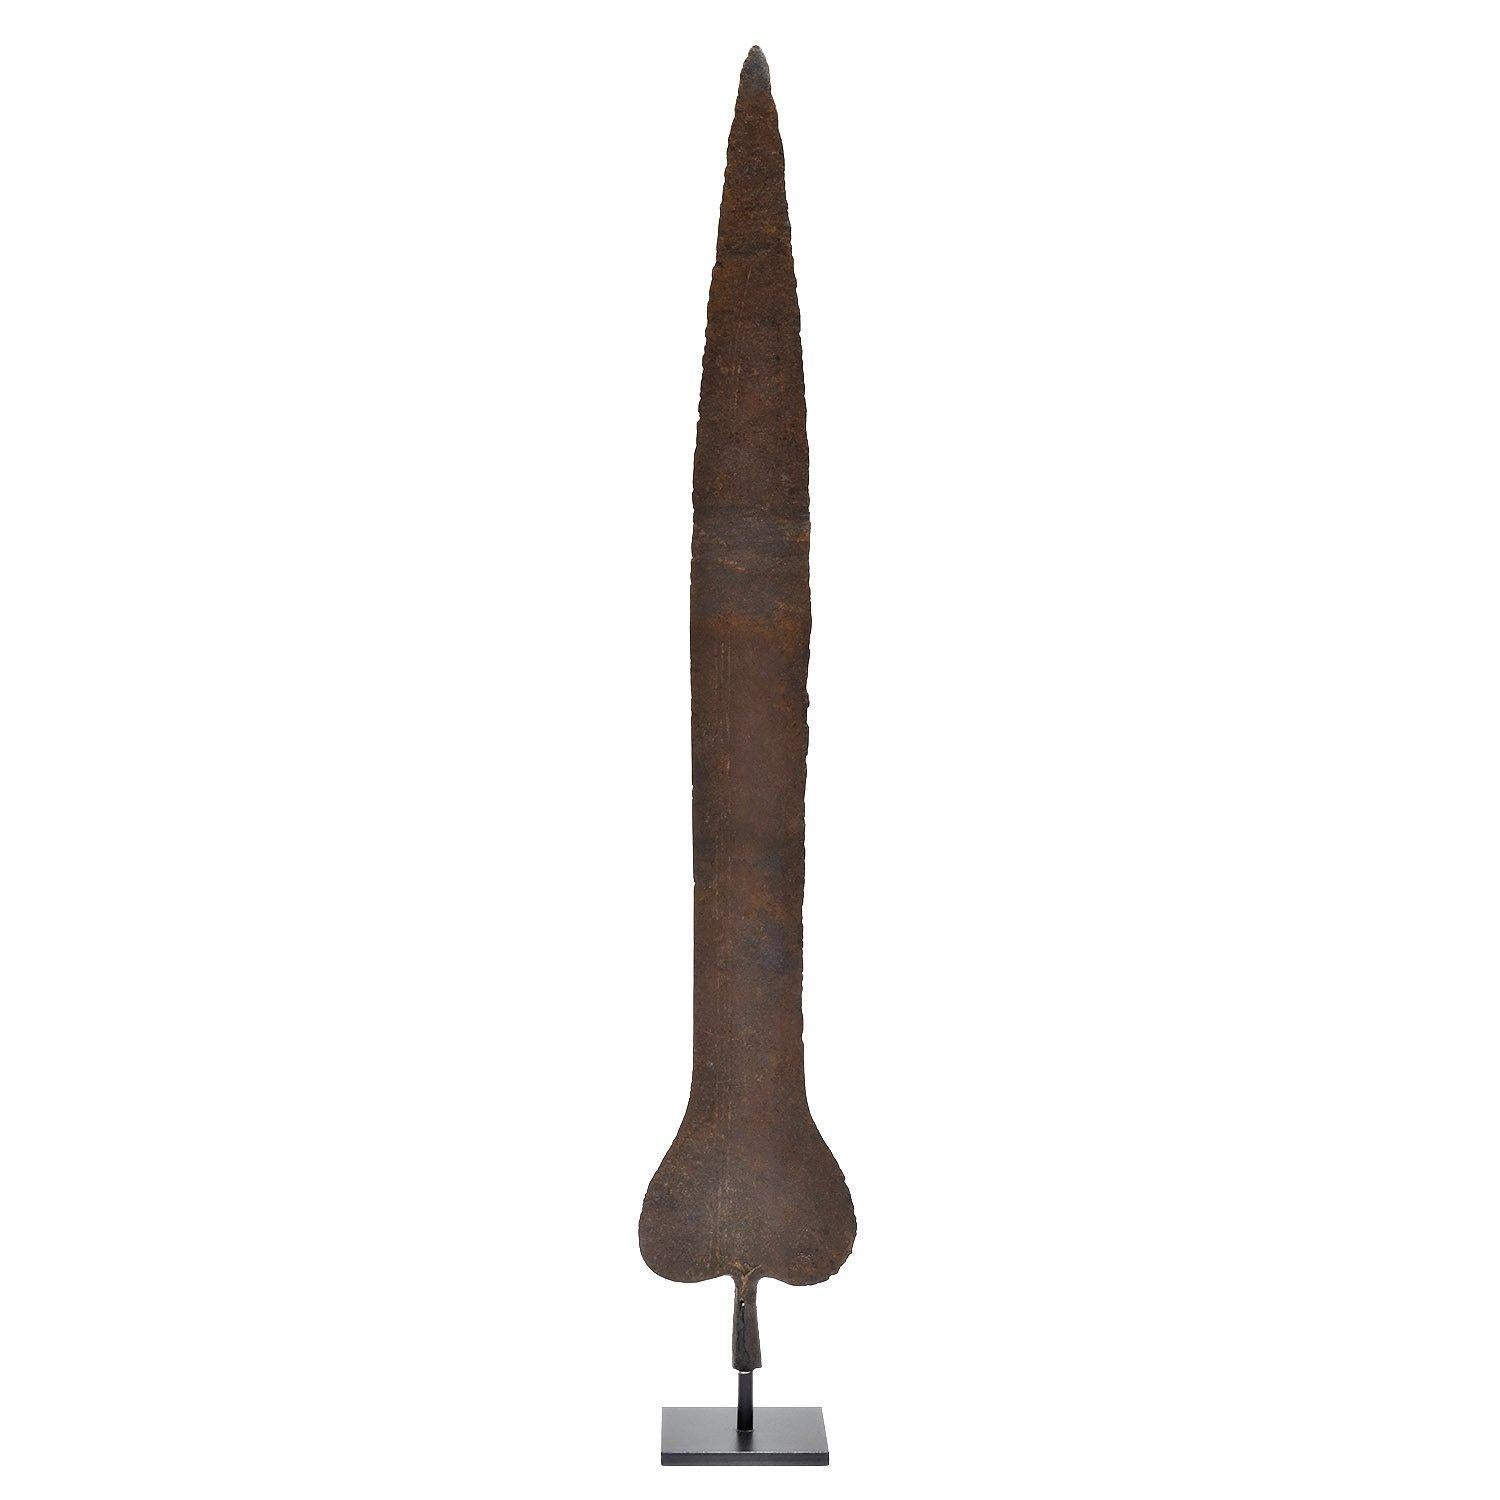 Topoke, DR Congo, Africa

Iron

Early 20th century

36 x 6 in. / 91 x 15 cm.

Height on custom display stand: 38.25 in. / 97 cm.

These big iron spear points were made by groups living in the region surrounded by the Congo, Lomami, and Aruwimi